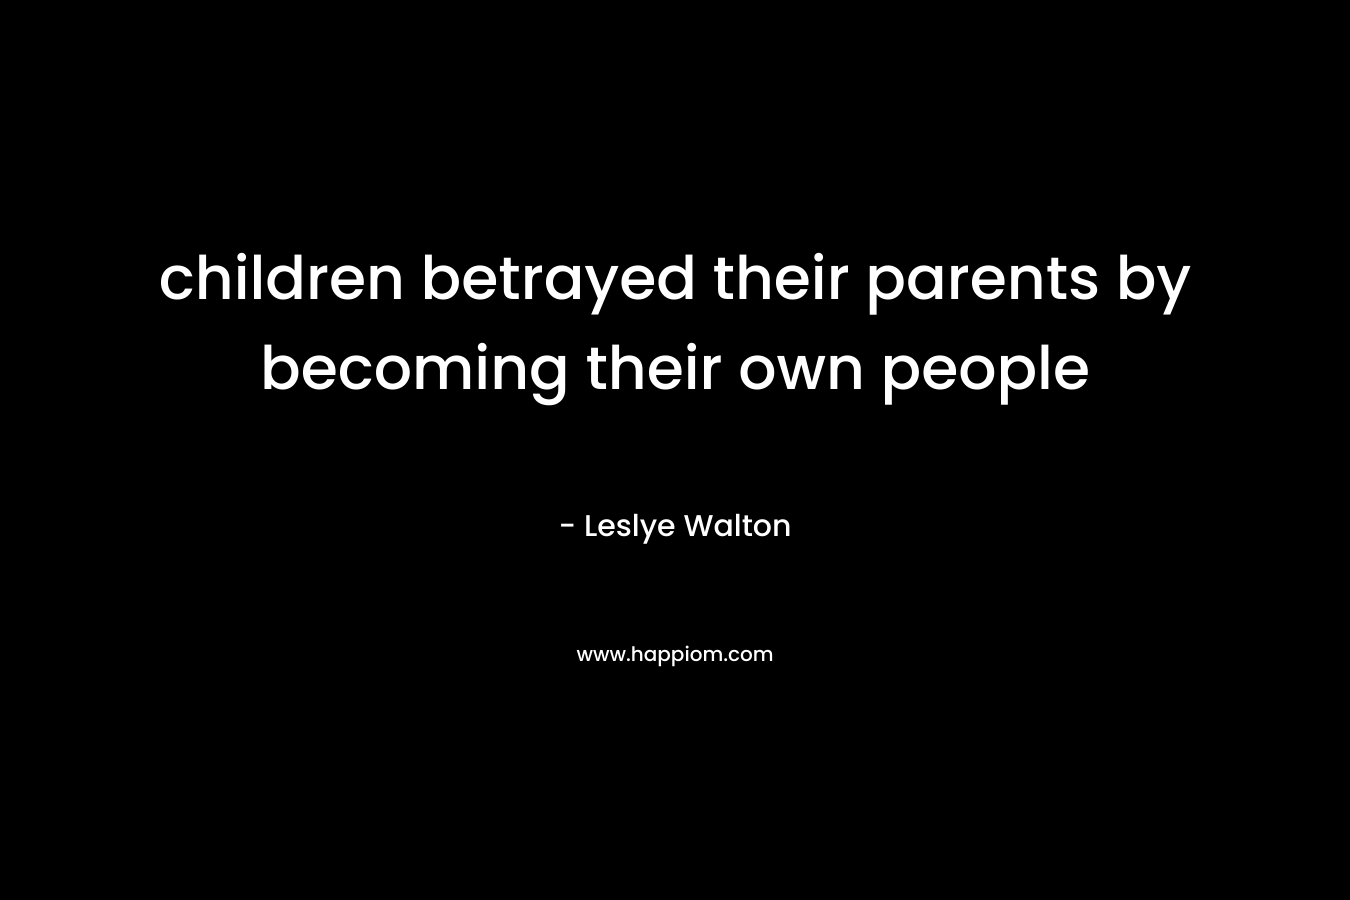 children betrayed their parents by becoming their own people